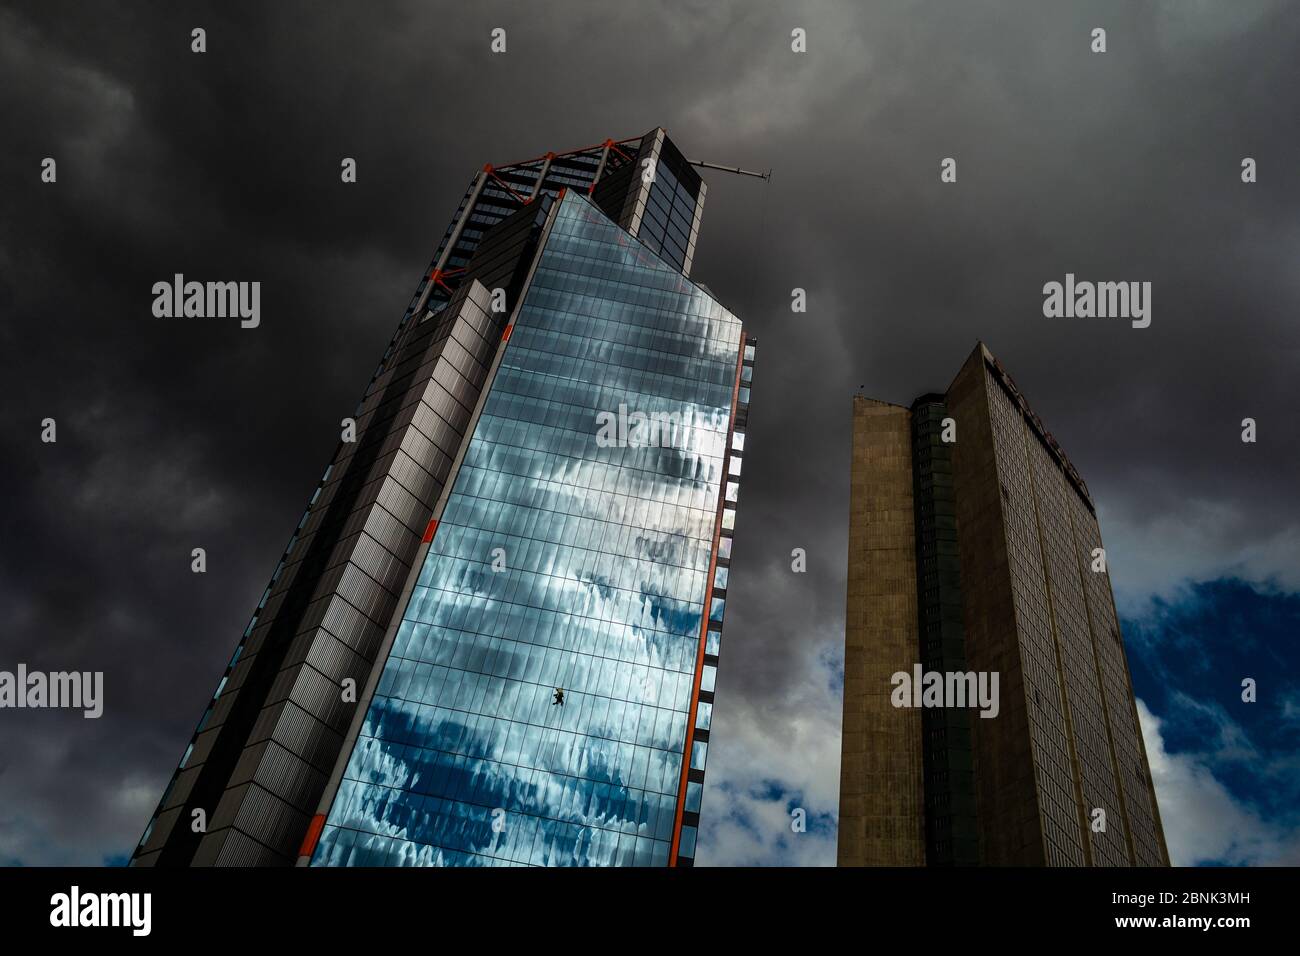 A Colombian window cleaner works outside the Atrio North Tower building before the rainstorm in Bogotá, Colombia. Stock Photo